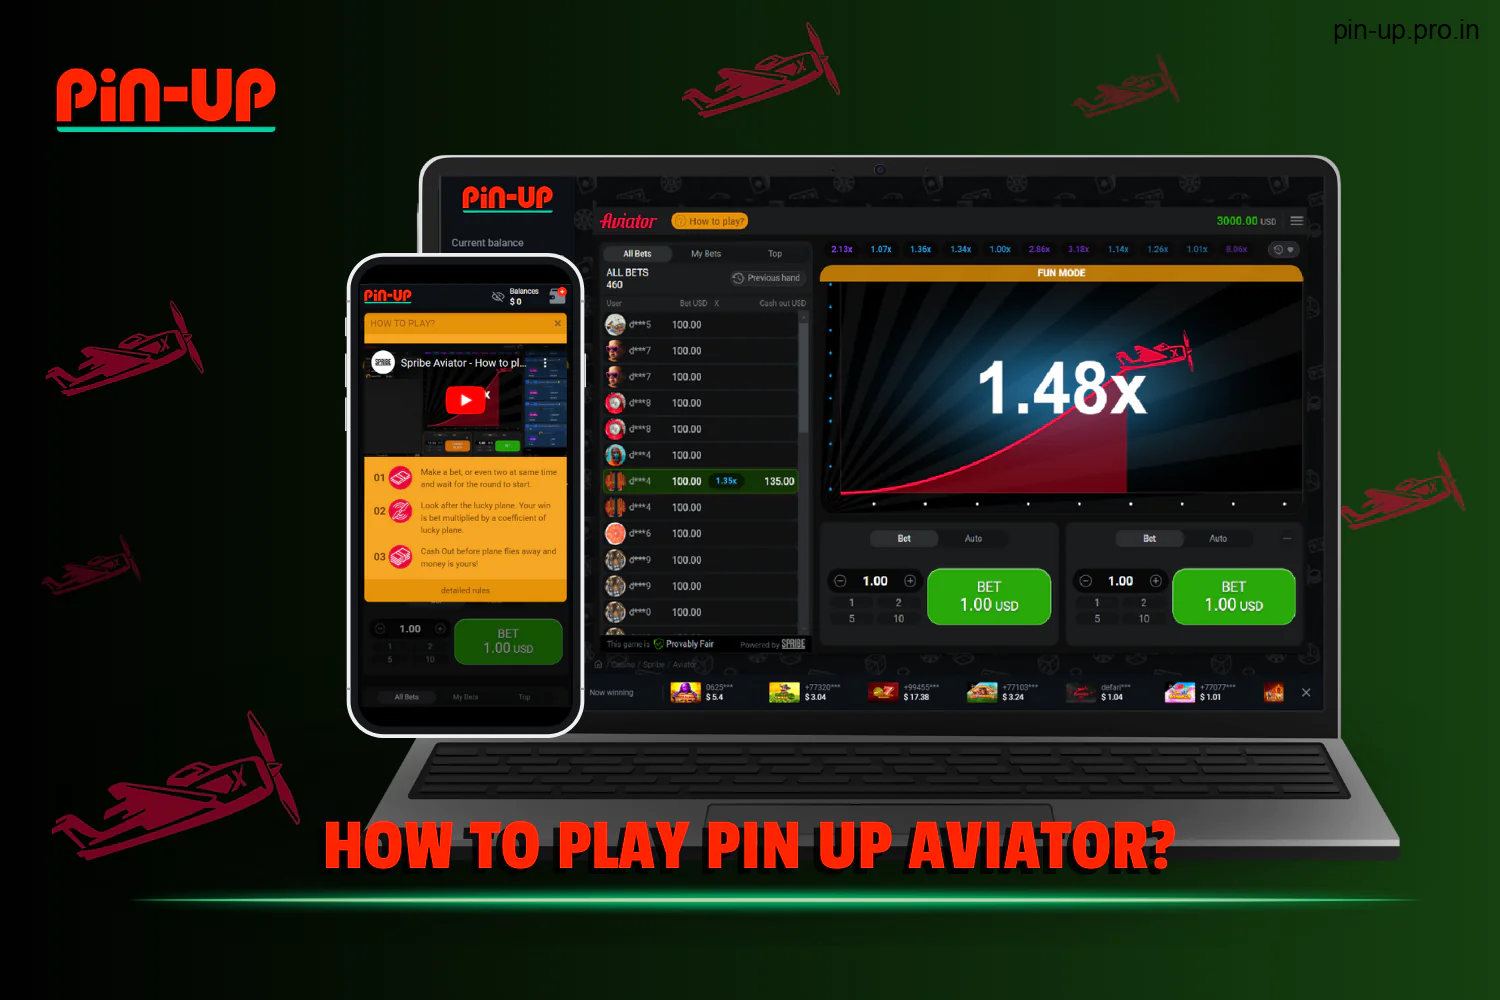 PinUp Aviator for Indian users has simple game mechanics and a video tutorial on how to play